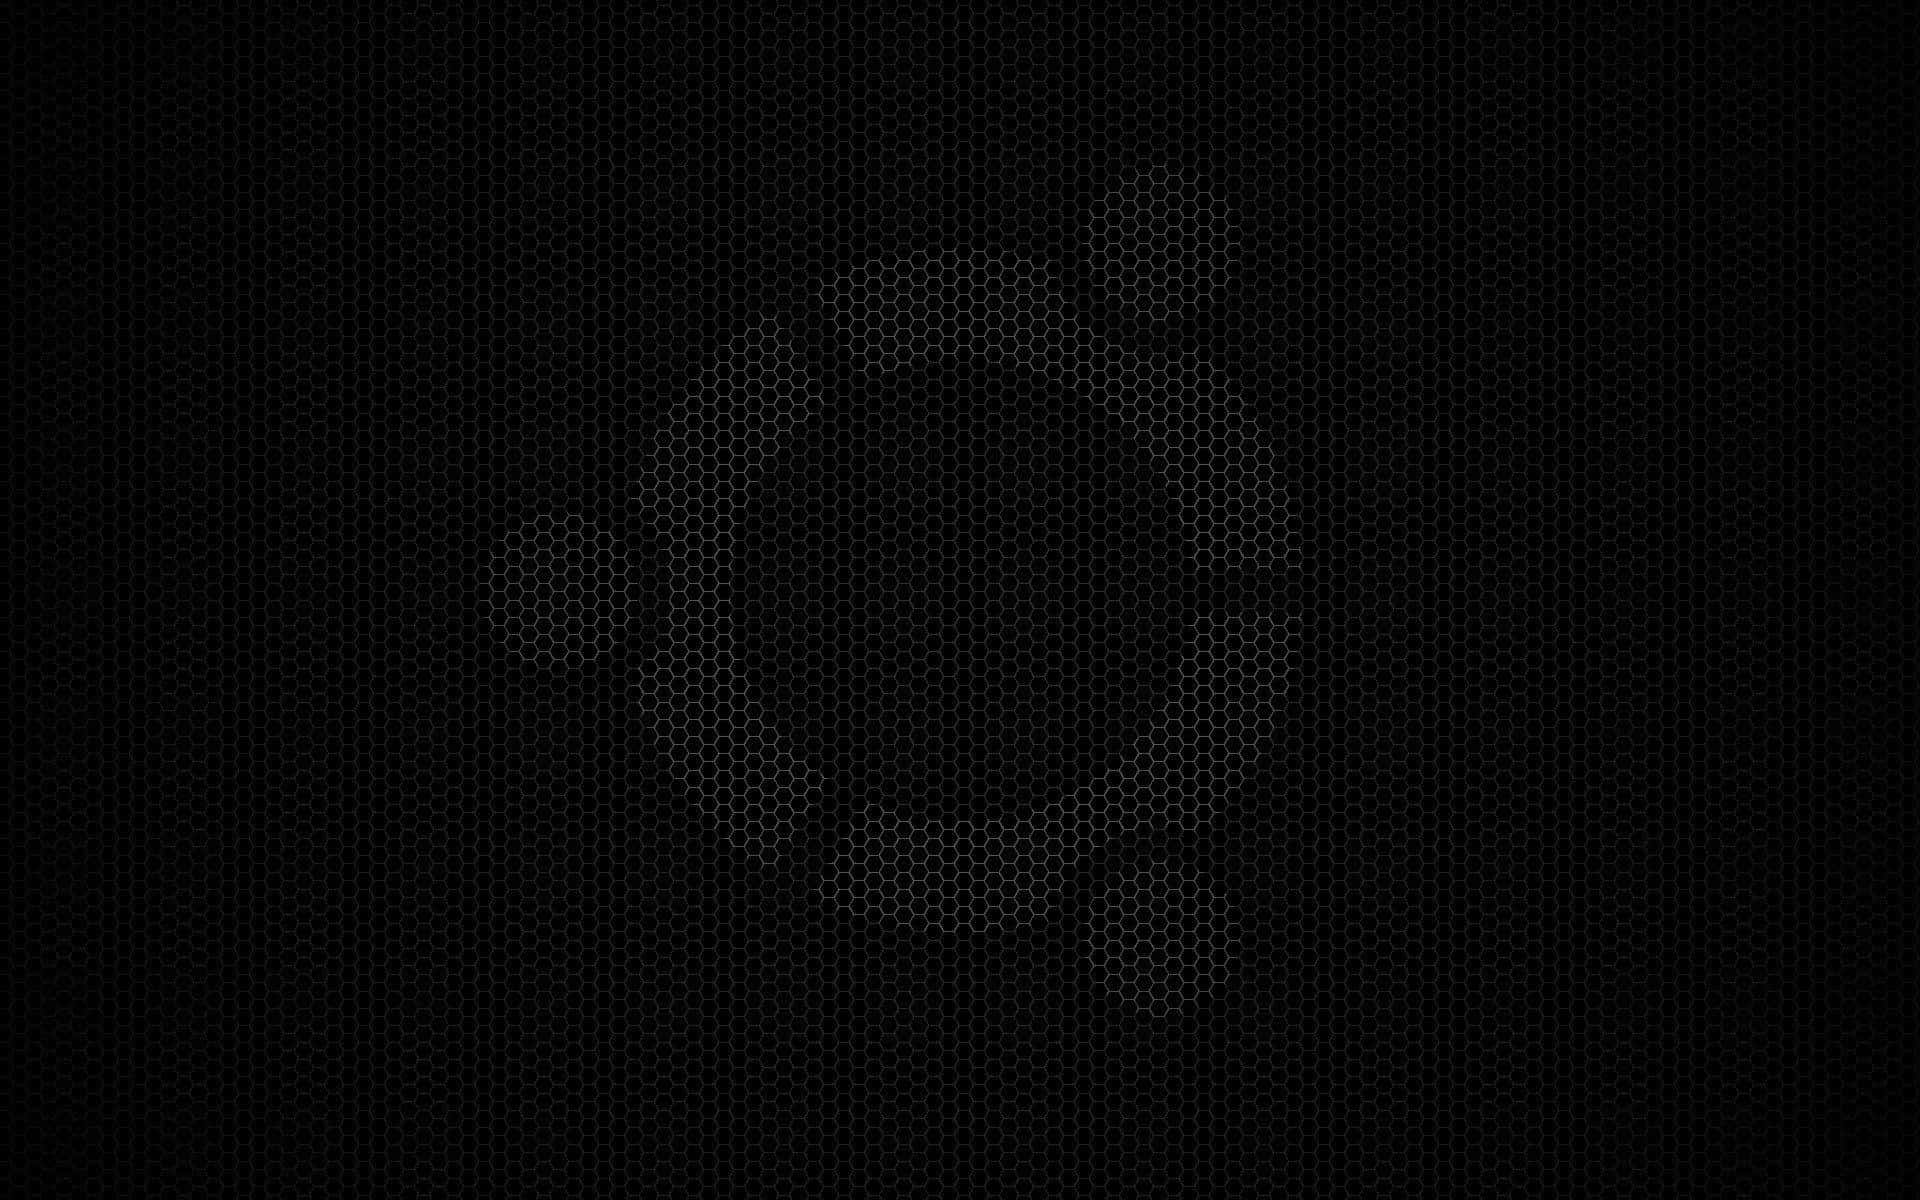 A Black Background With A Circle On It